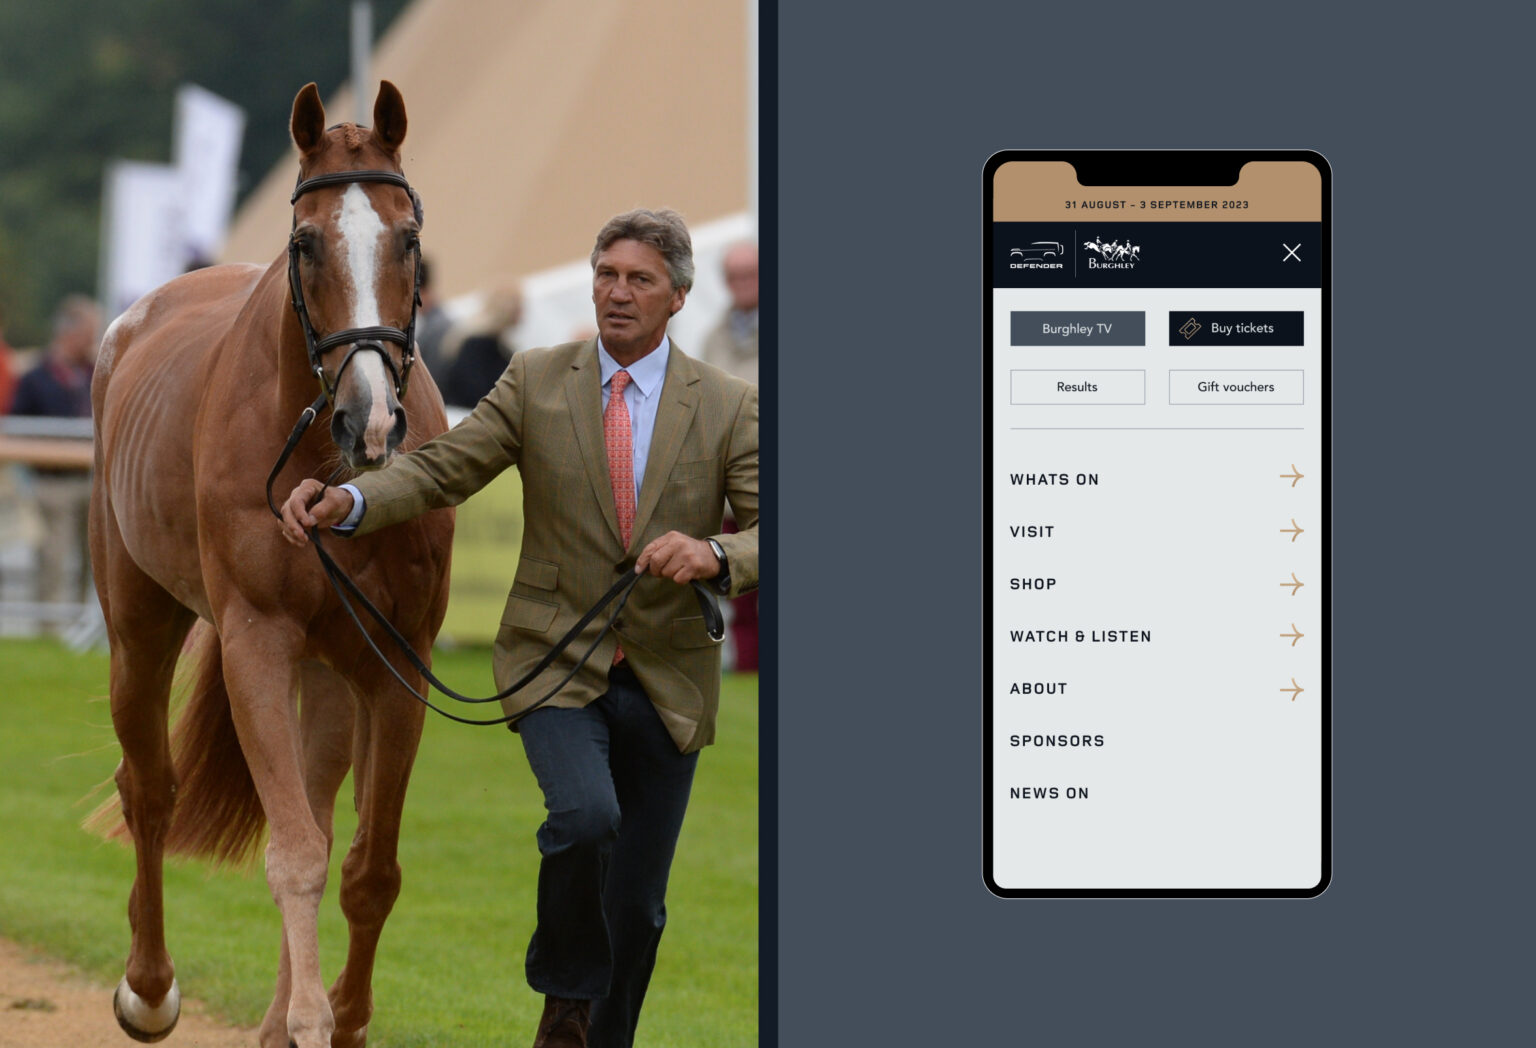 05 Burghley Horse Trials horse photography and mobile menu mockup